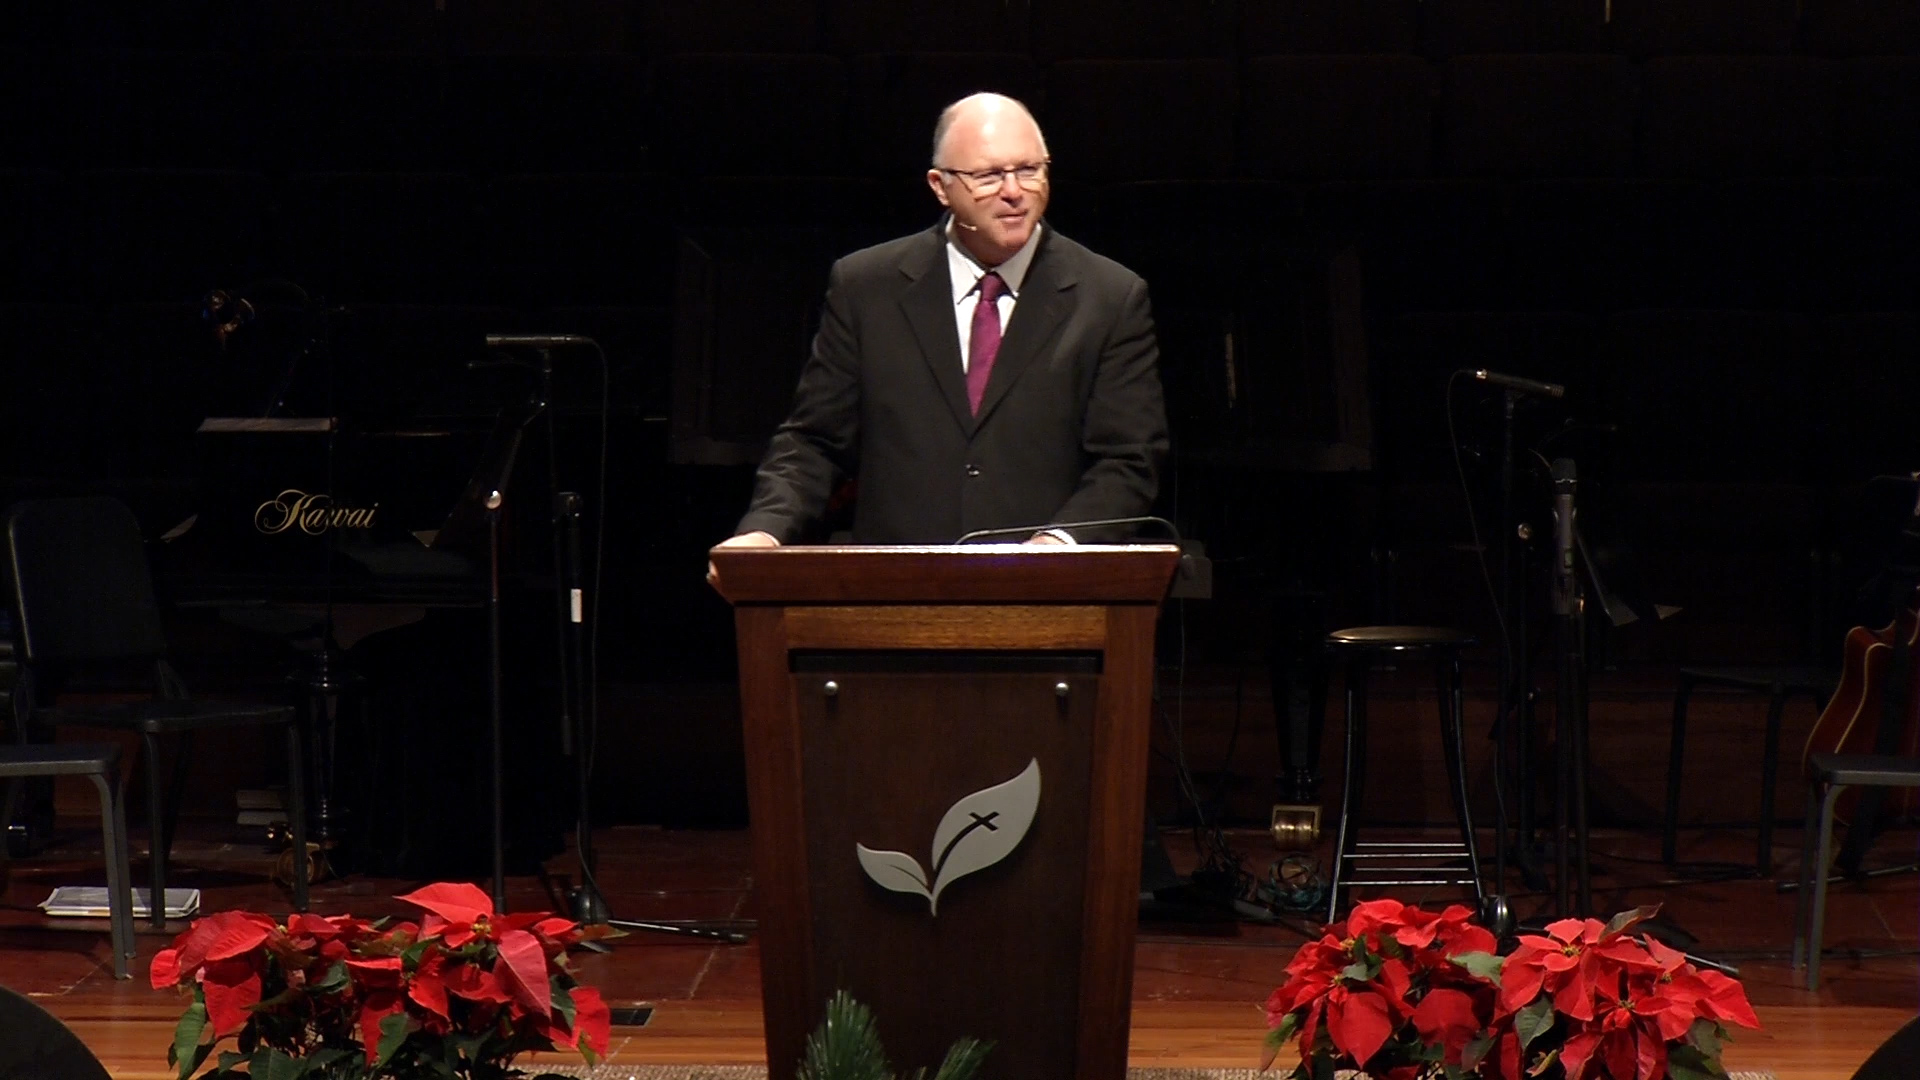 Pastor Paul Chappell: The Fulfillment of Grace